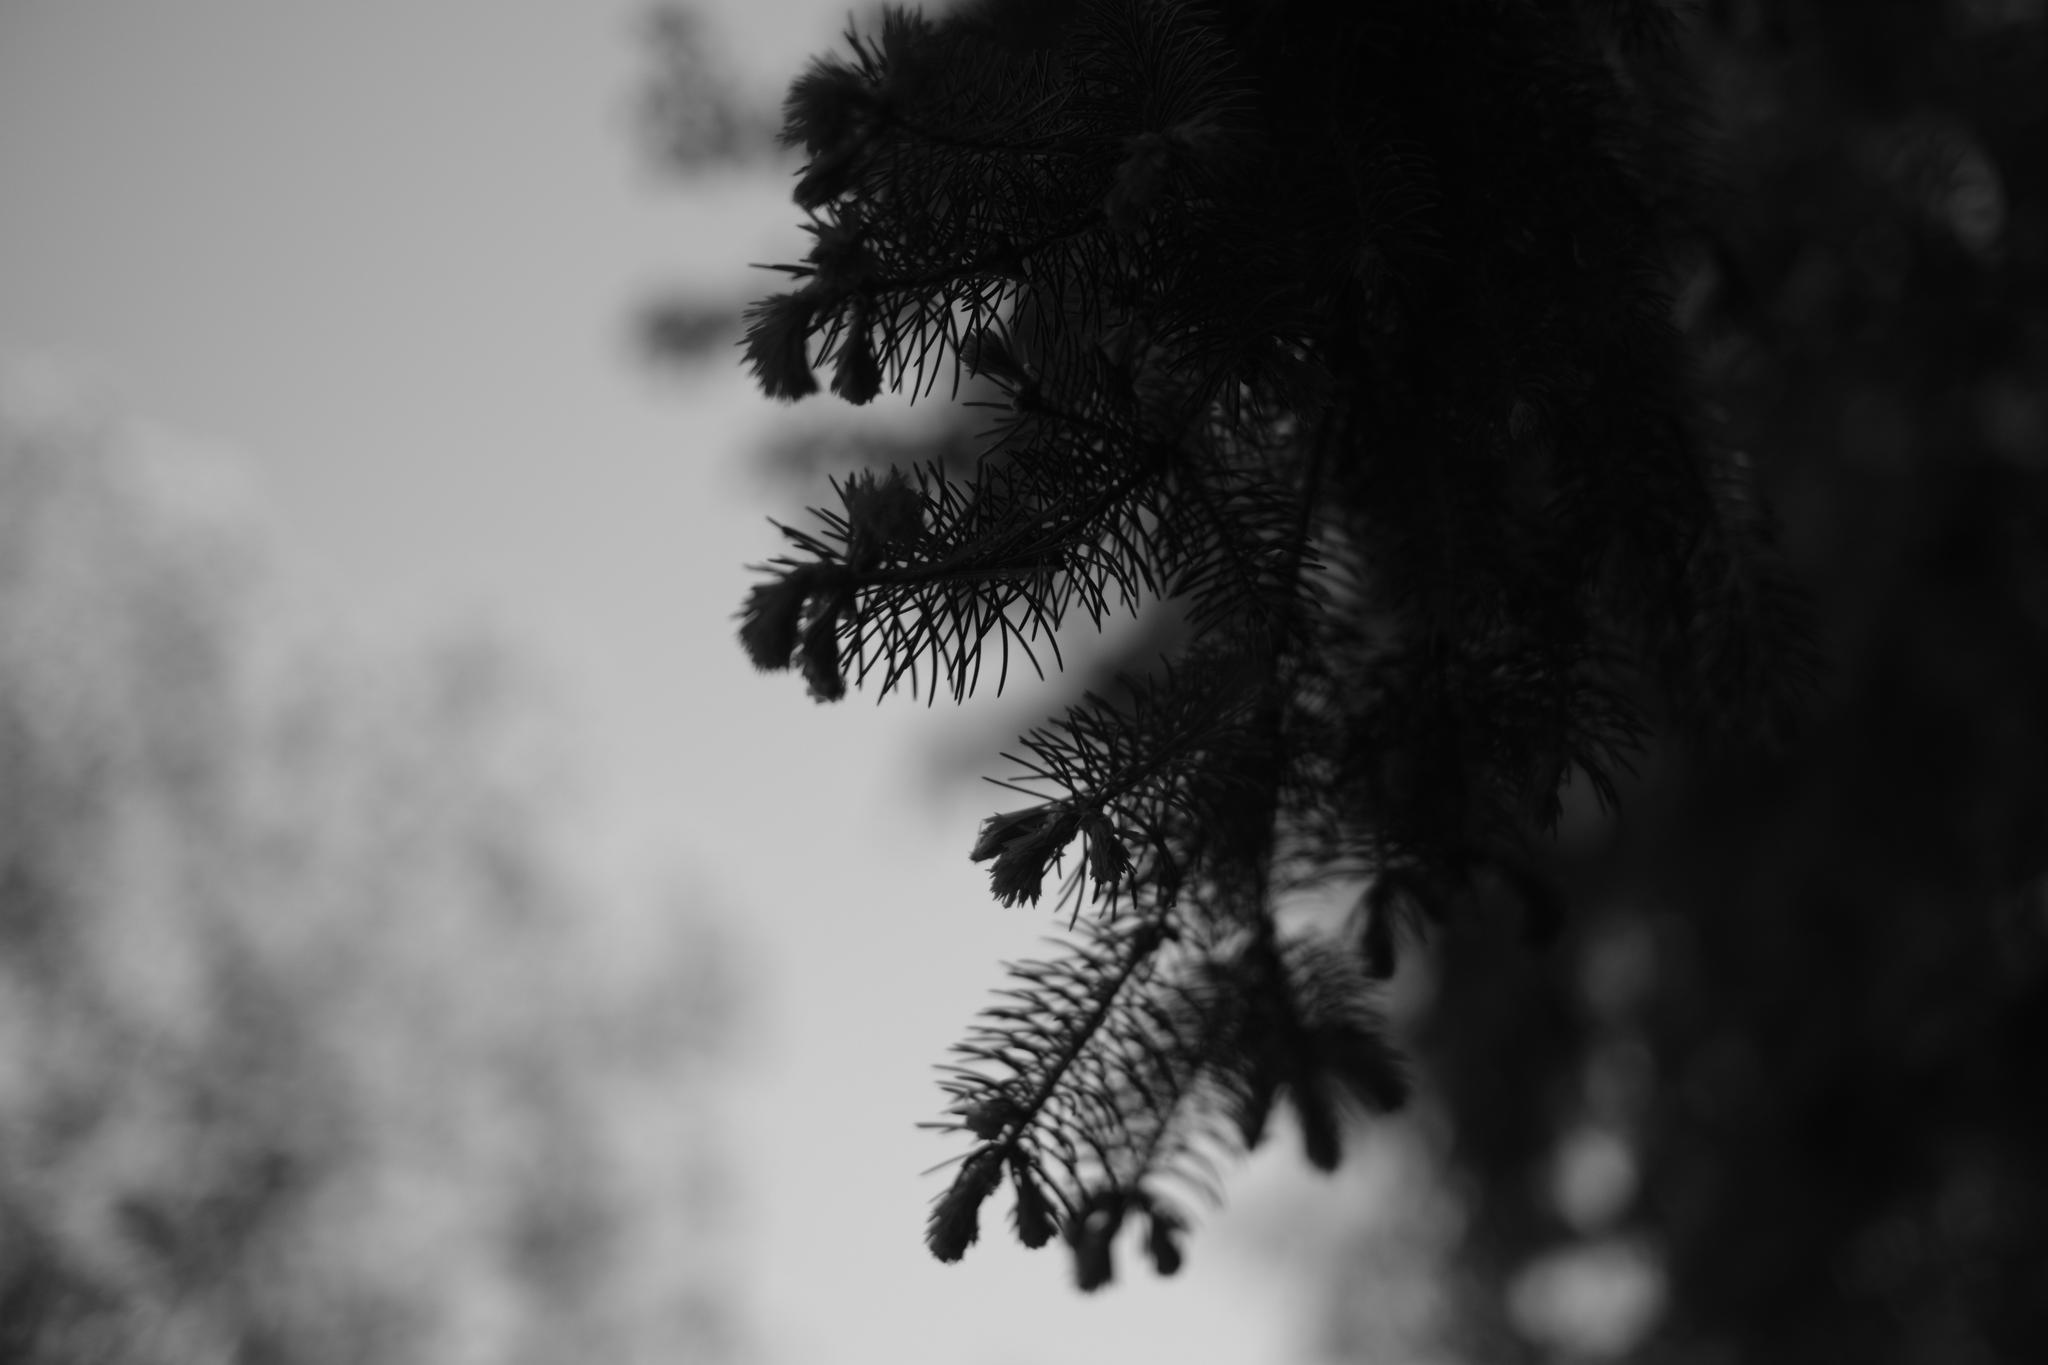 A close-up of pine tree branches in black and white, with a blurred background